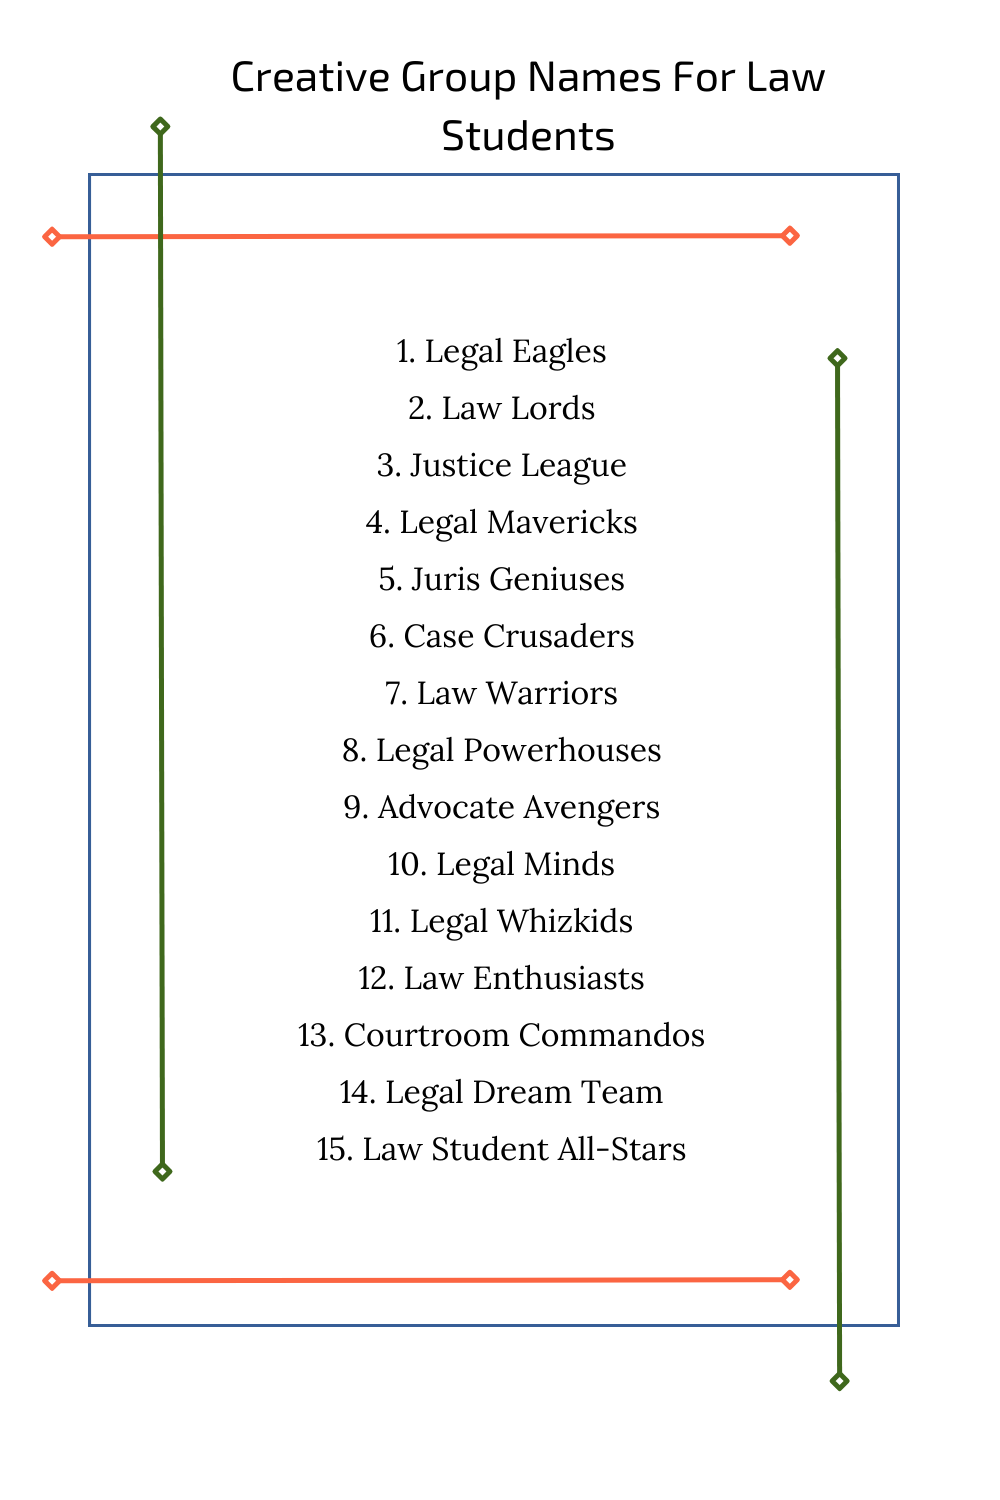 Creative Group Names For Law Students